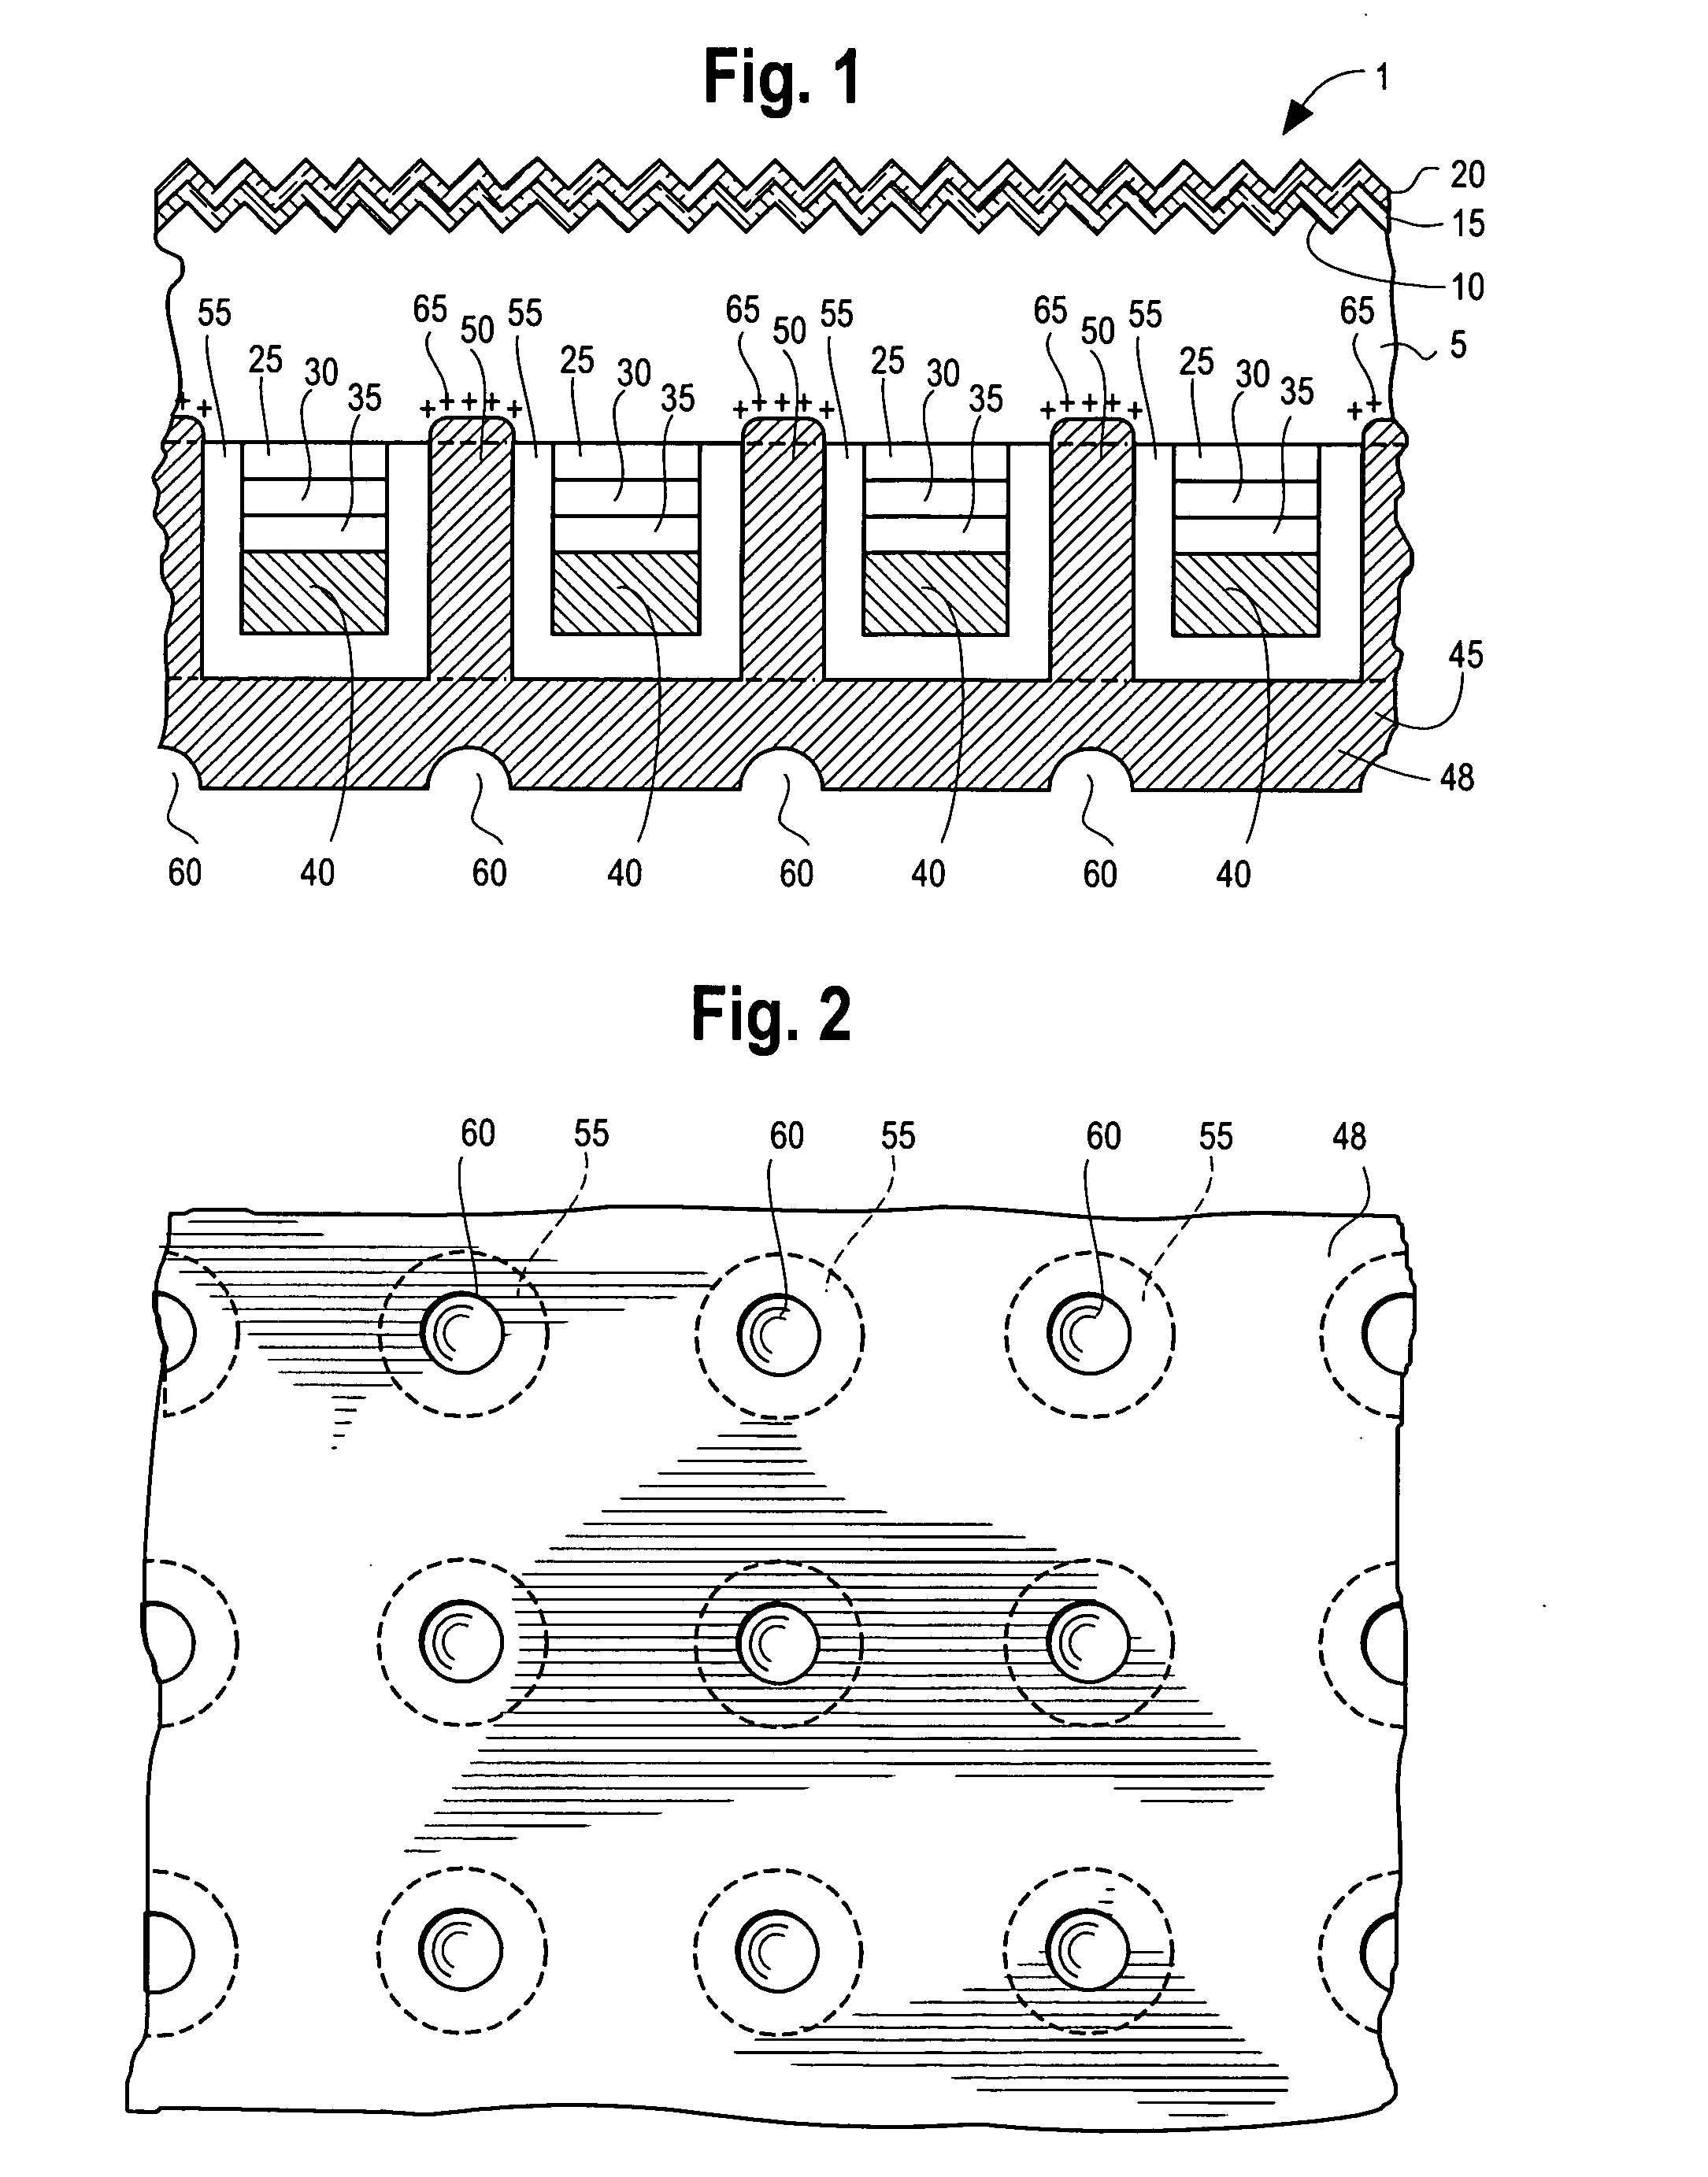 Back-contact photovoltaic cells